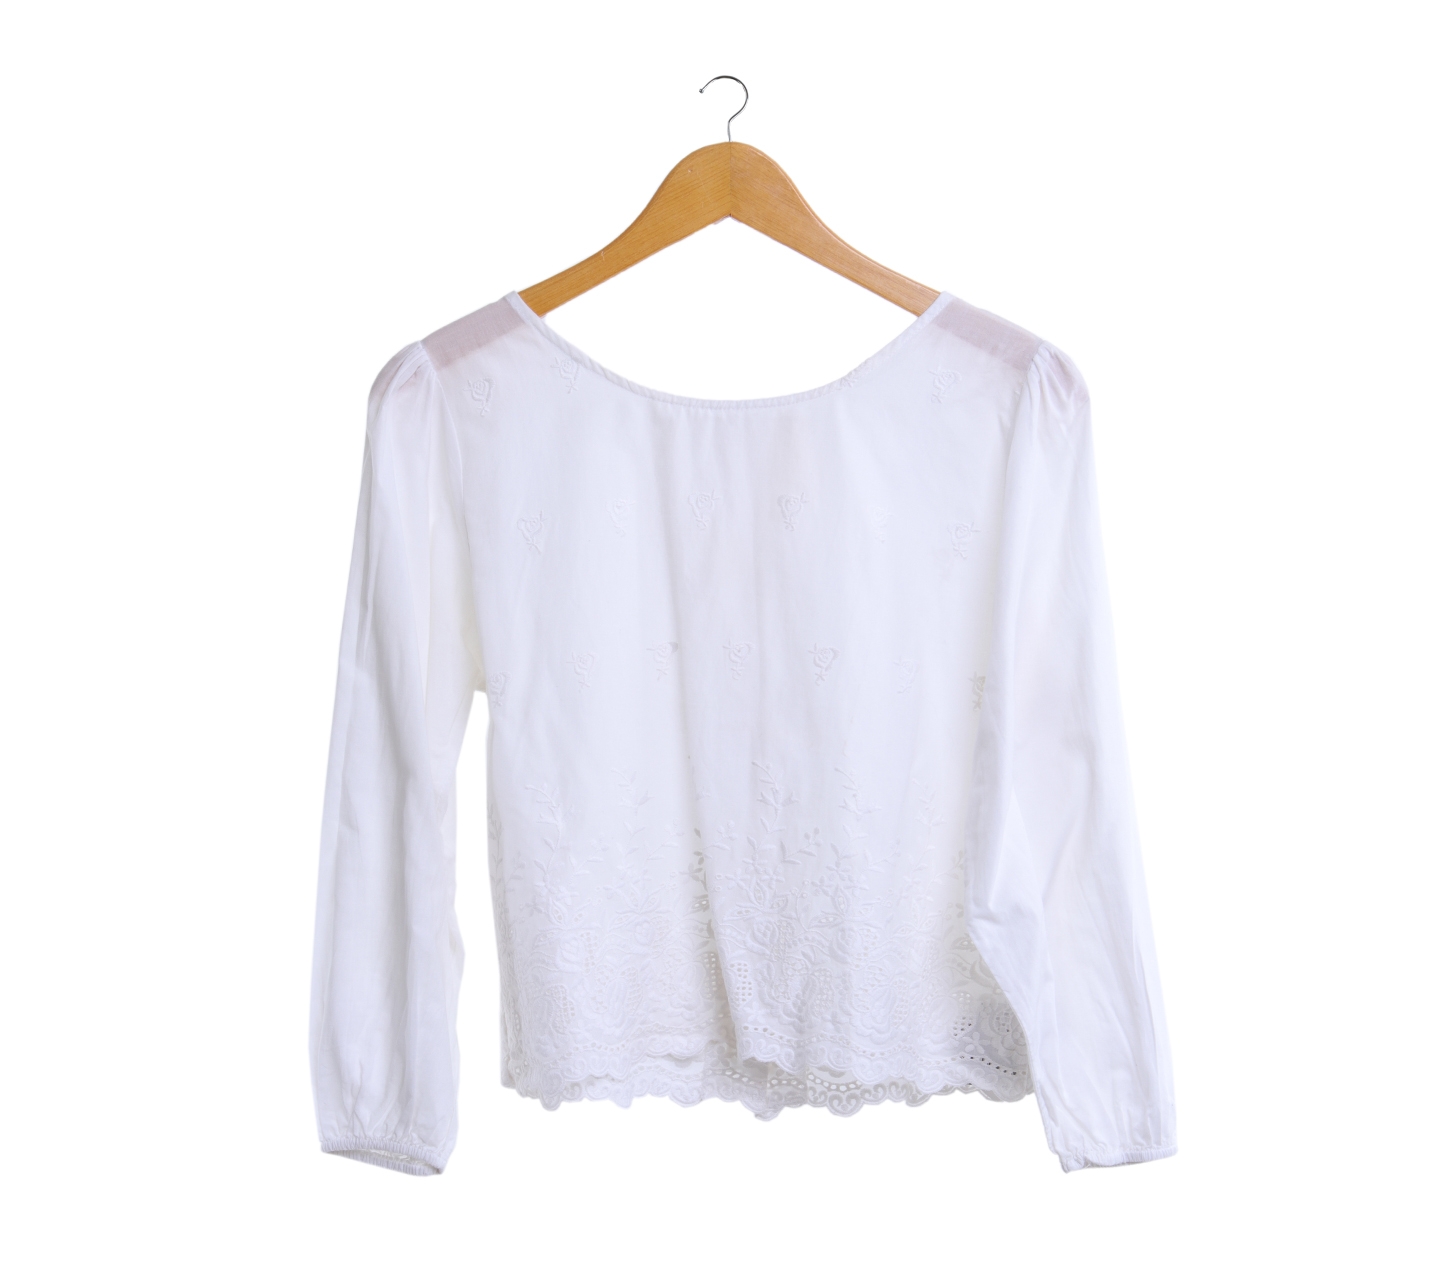 Plowbrands Off White Patterned Cropped Blouse